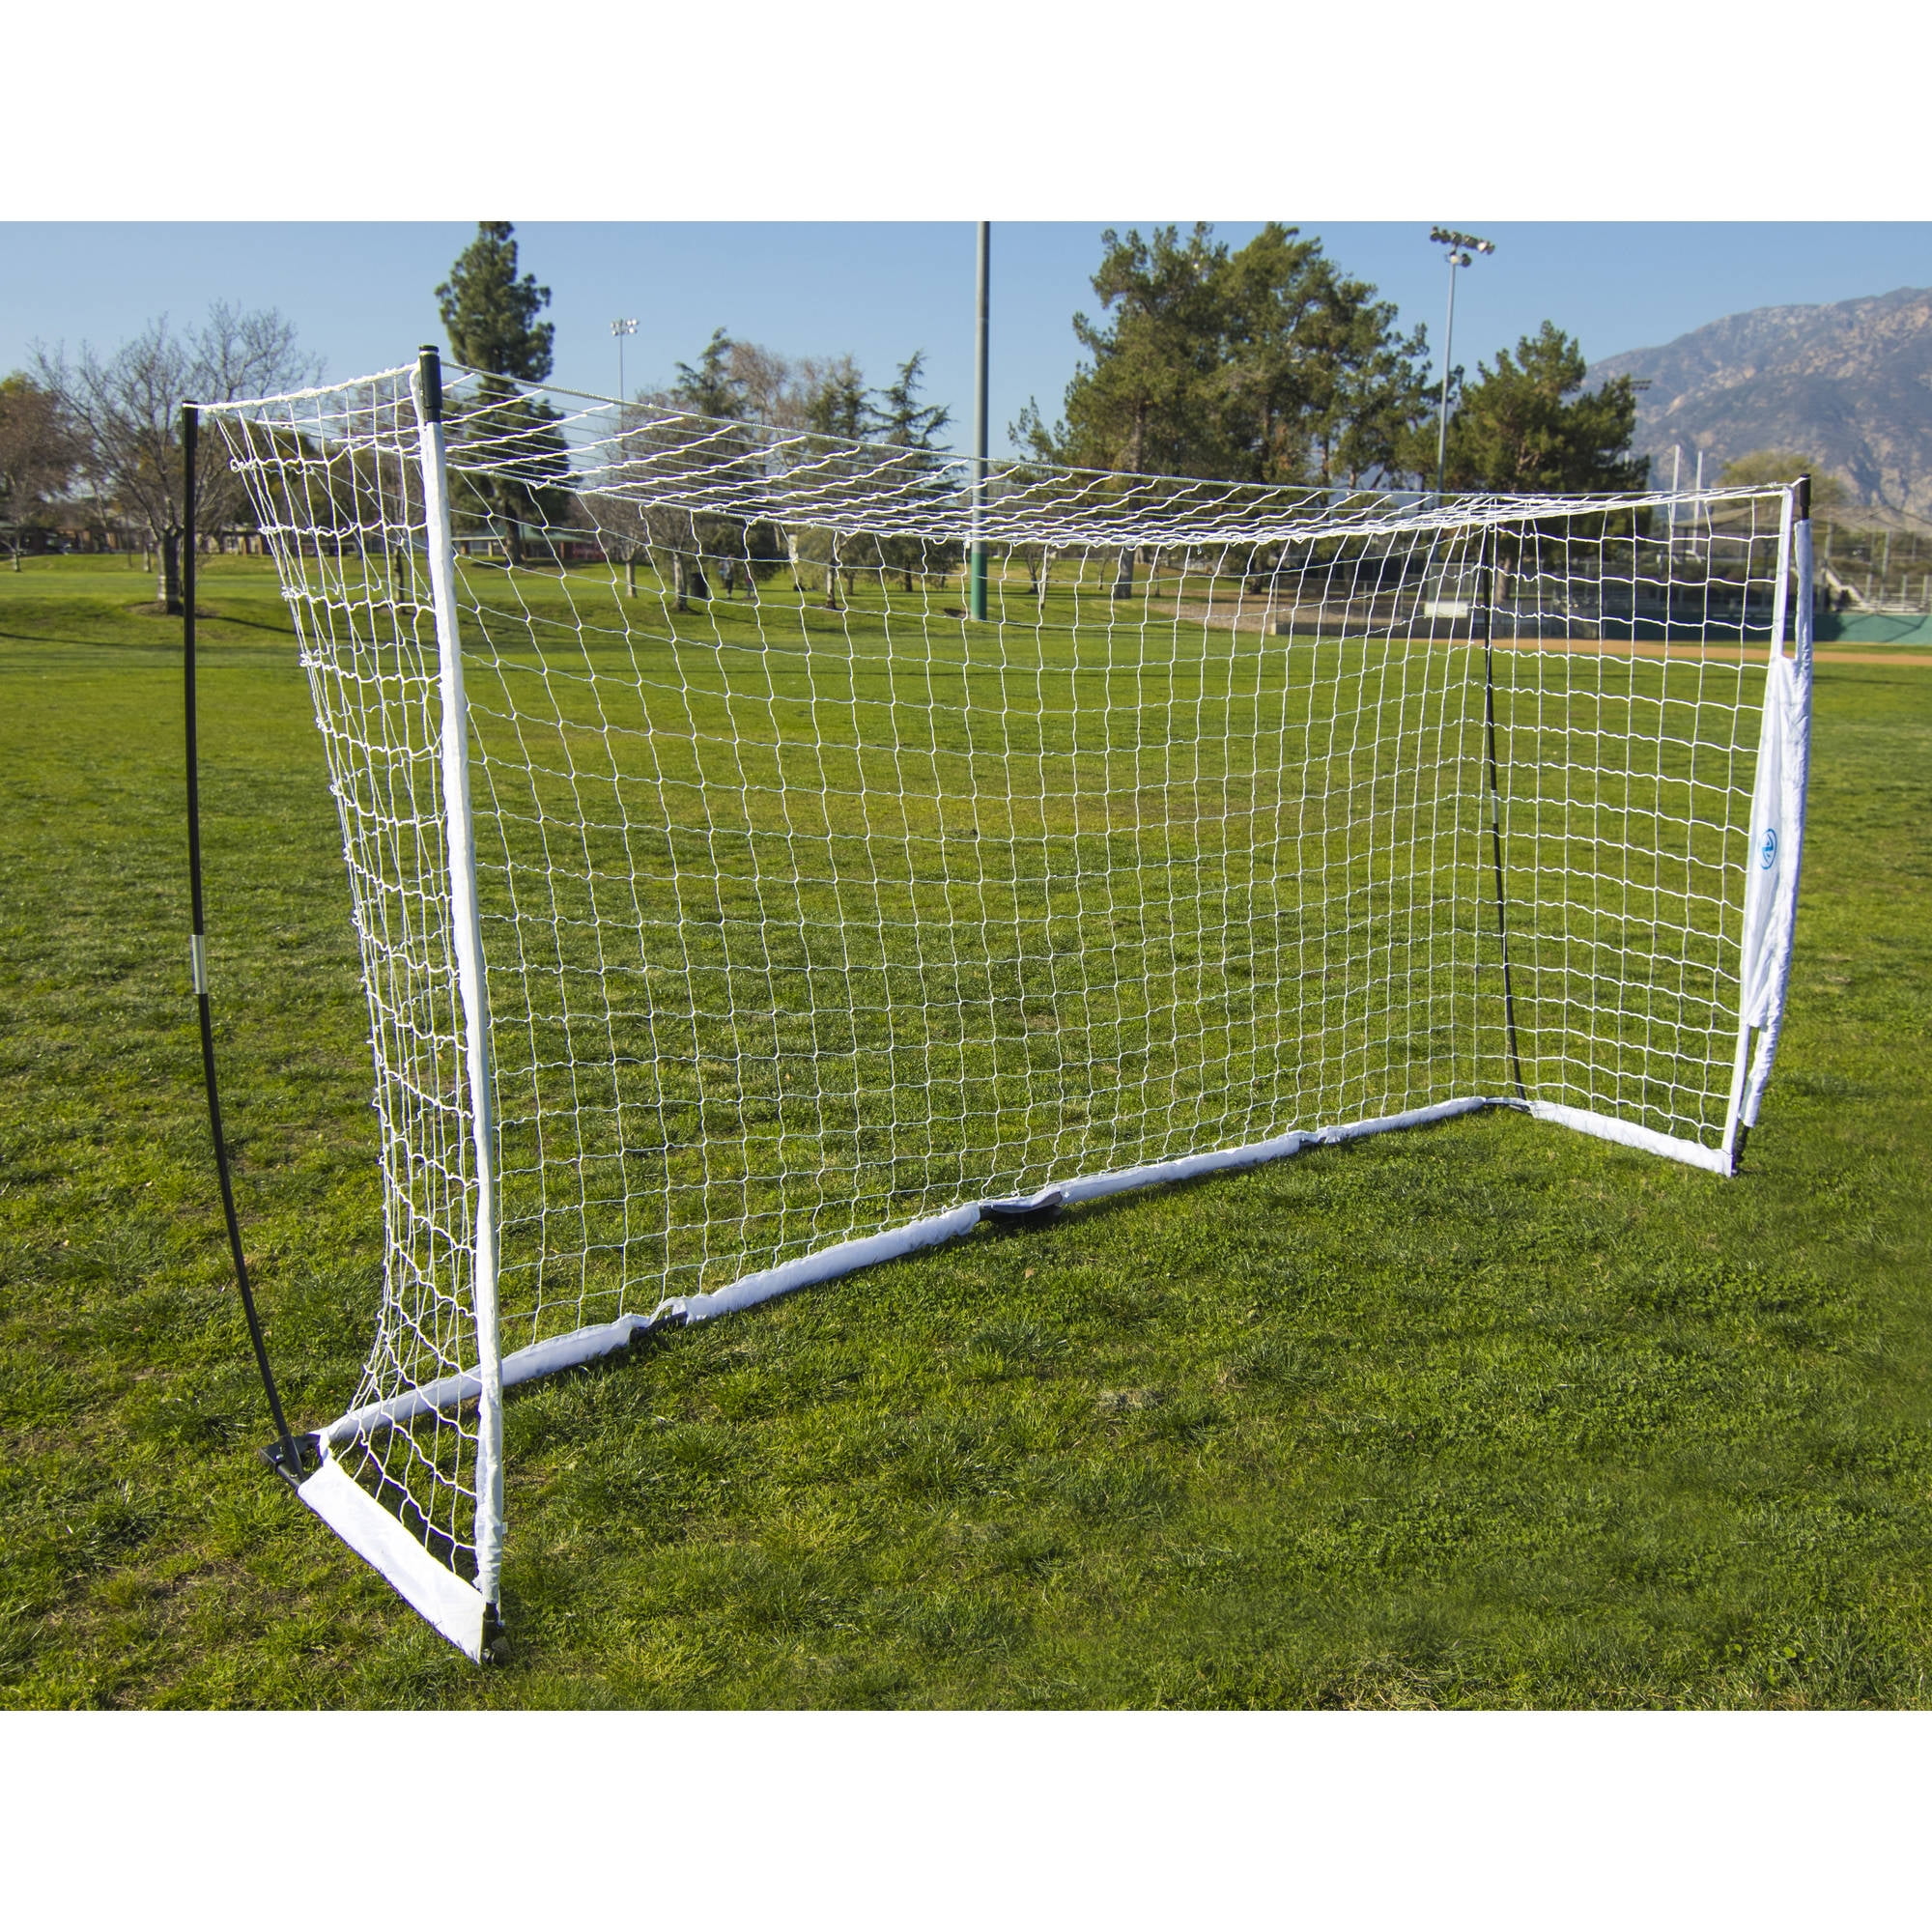 Details about   Athletic Works Soccer Goal 6'x4' Pop Up Sports Training Portable Indoor/Outdoor 